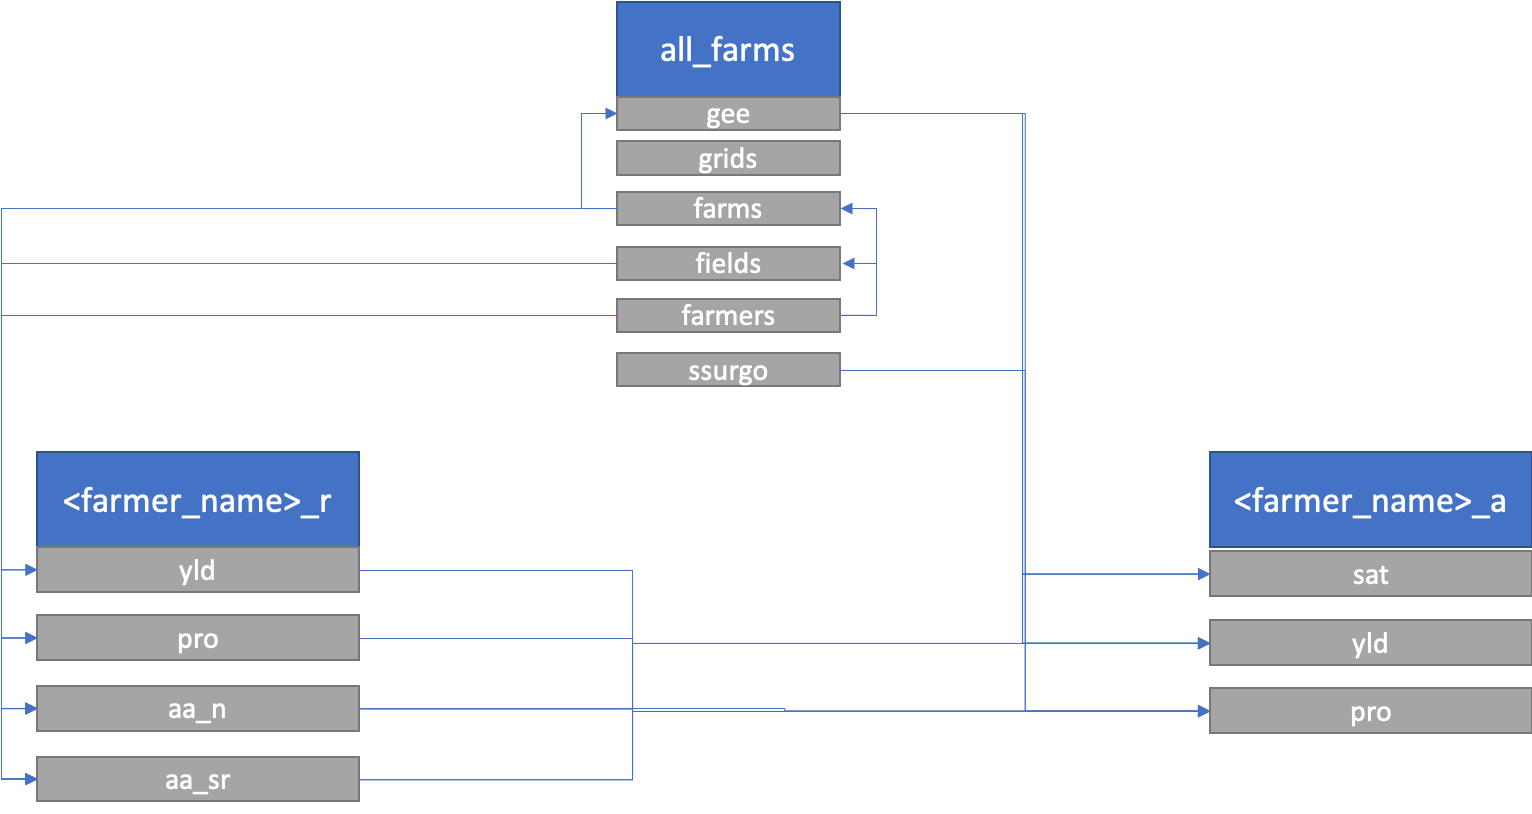 **Figure 1.** OFPE database design. Blue boxes represent schema names and gray boxes represent tables within each schema. The all_farms tables are 'gee' = Google Earth Engine data, 'grids' = 10m grids laid across file, 'farms' = farm boundaries and information., 'farmers' = farmer identifiaction, 'fields' = experimental field boundaries and information, and 'ssurgo' = SSURGO soil data. For every farmer, there is a '_r' and '_a' schema associated, for raw and aggregated data, respectively. In the raw schema there are tables for yield ('yld'), protein ('pro'), and as-applied nitrogen ('aa_n') and seed rates ('aa_sr'). The aggregated schema contains data aggregated to the raw yield points ('yld') or raw protein points ('pro'). Remotely sensed data from Google Earth Engine can be aggregated to the centers of the 10m grids without any on-farm data for any year satellite data is available ('sat').